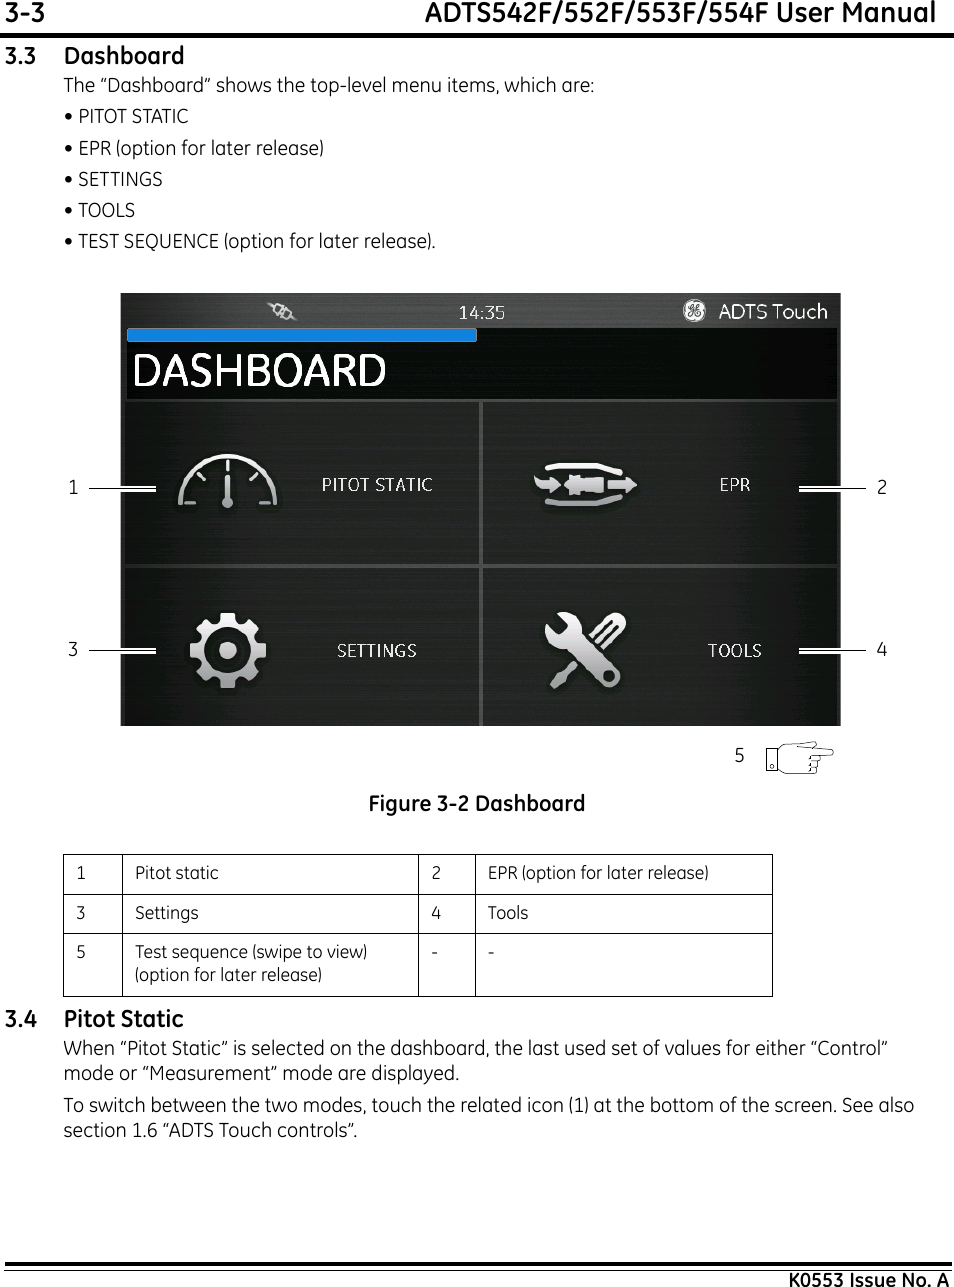 3-3  ADTS542F/552F/553F/554F User ManualK0553 Issue No. A3.3 DashboardThe “Dashboard” shows the top-level menu items, which are:• PITOT STATIC• EPR (option for later release)• SETTINGS• TOOLS• TEST SEQUENCE (option for later release). Figure 3-2 Dashboard3.4 Pitot StaticWhen “Pitot Static” is selected on the dashboard, the last used set of values for either “Control” mode or “Measurement” mode are displayed.To switch between the two modes, touch the related icon (1) at the bottom of the screen. See also section 1.6 “ADTS Touch controls”.1 Pitot static 2 EPR (option for later release)3 Settings 4 Tools5 Test sequence (swipe to view) (option for later release)--13 425